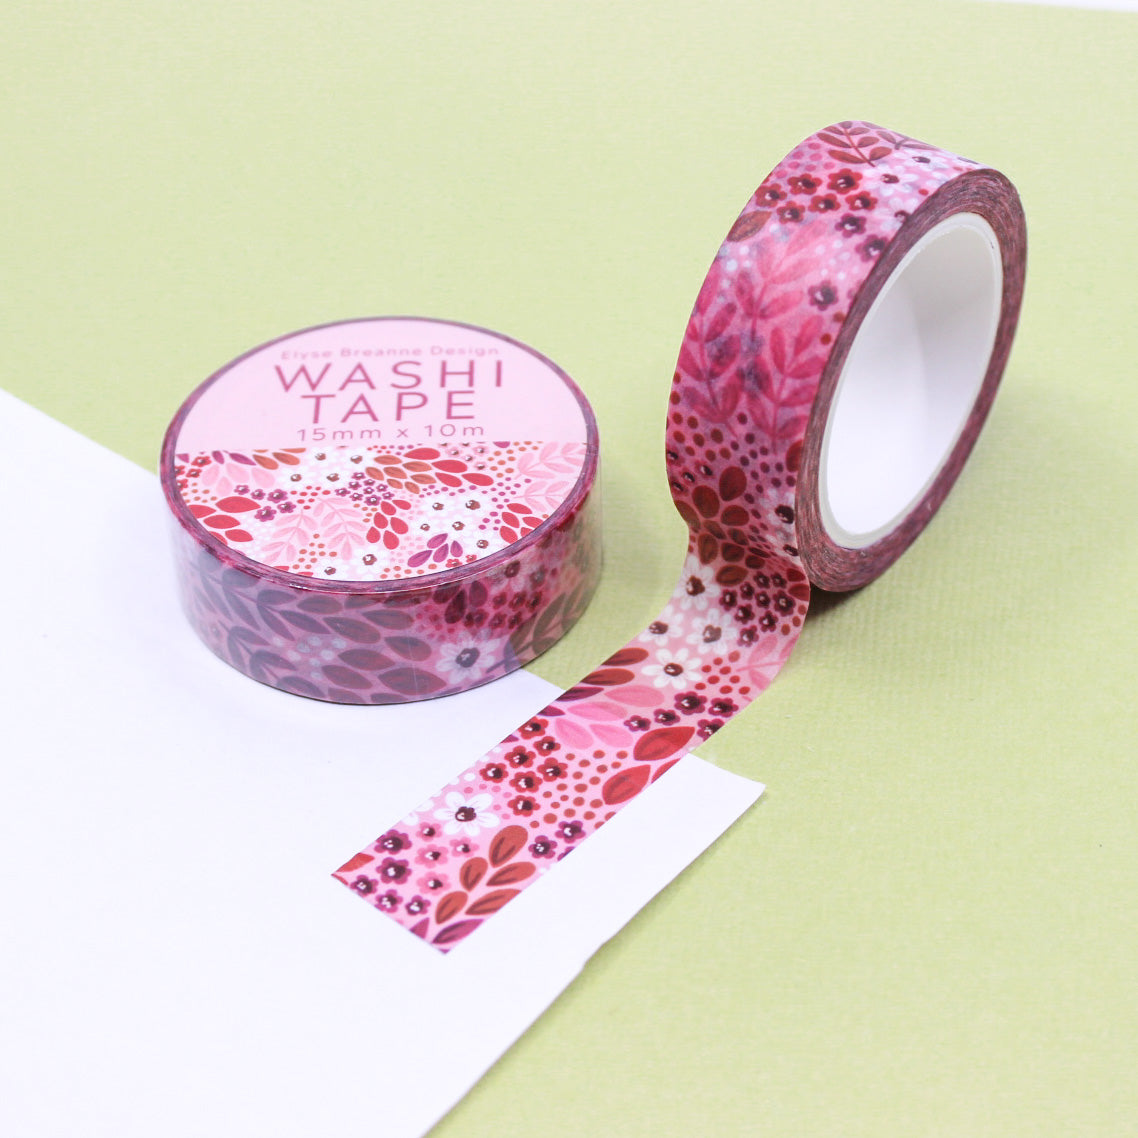 Modern Sangria Red Floral Washi Tape: Vibrant red tape featuring stylish floral patterns, perfect for enhancing your planners, scrapbooks, and crafts with a bold, elegant touch. This tape is from Elyse Breanne Designs and sold at BBB Supplies Craft Shop.